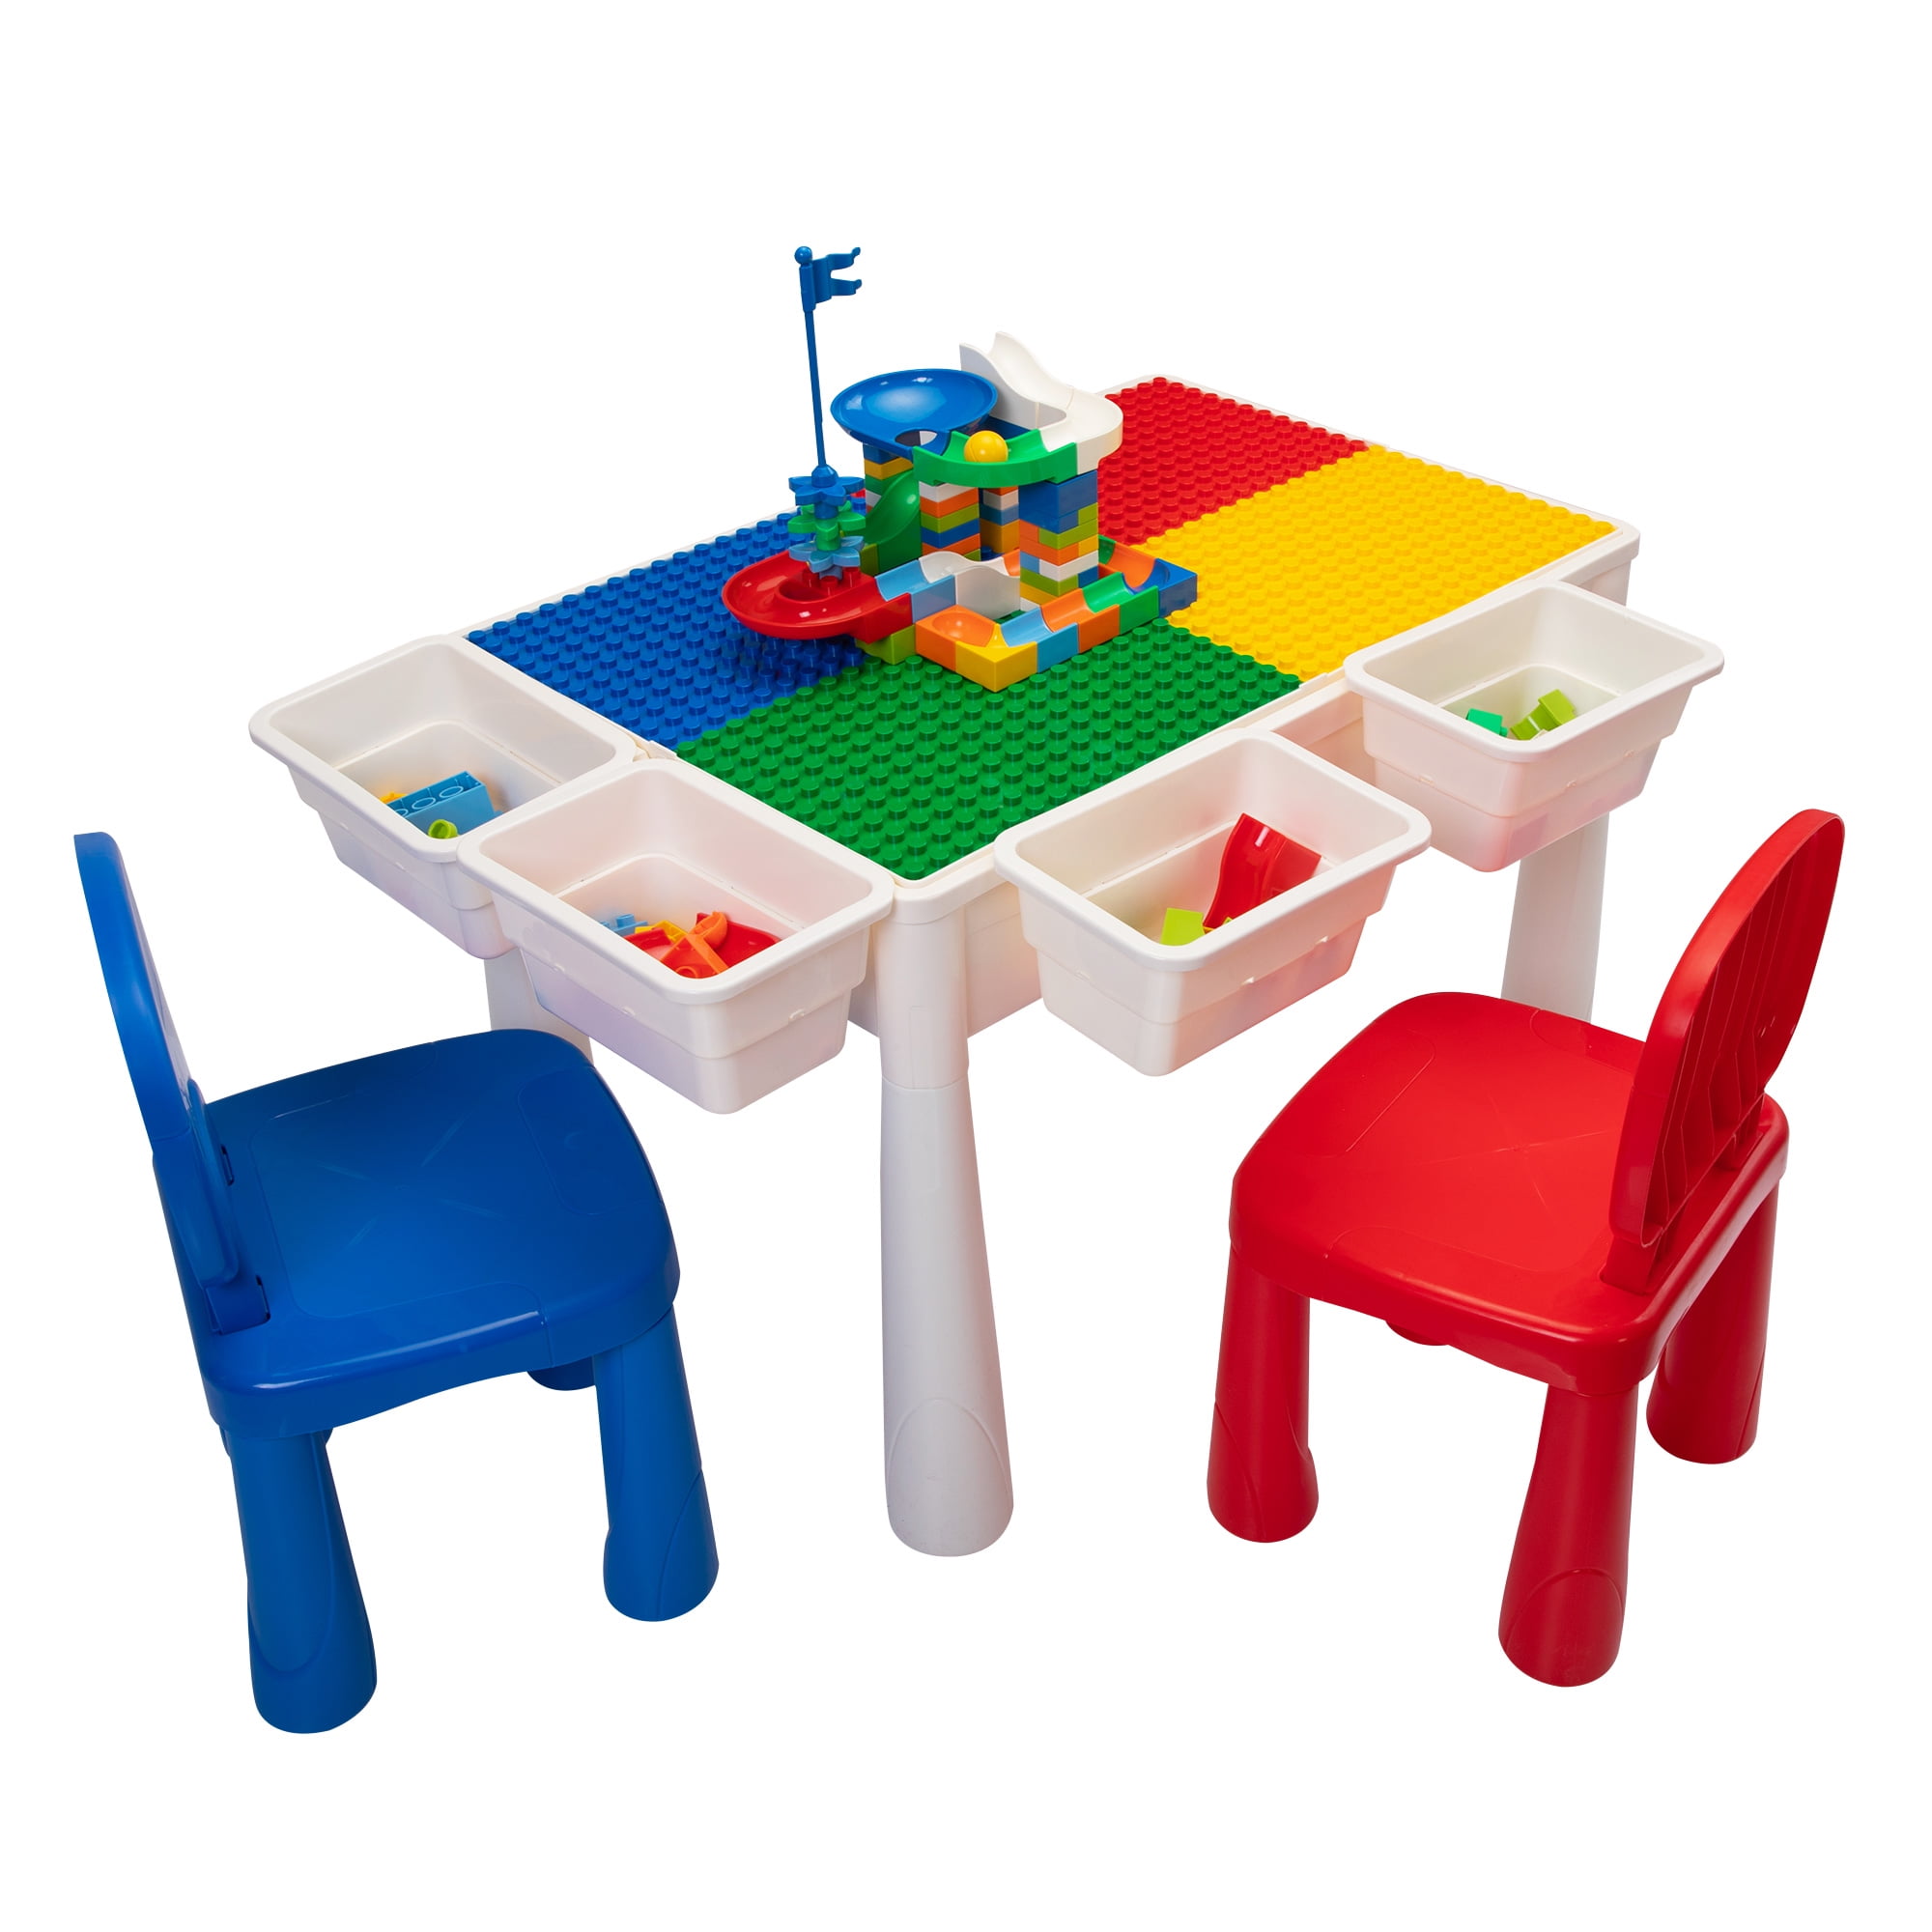 7 in 1 Multi Kids Activity Table Set with 2 Chairs and 170 Pcs Blocks Compatible Blocks.Water Table,Sand Table and Building Blocks Table with 4 Storage Boxes,for Toddlers Activity